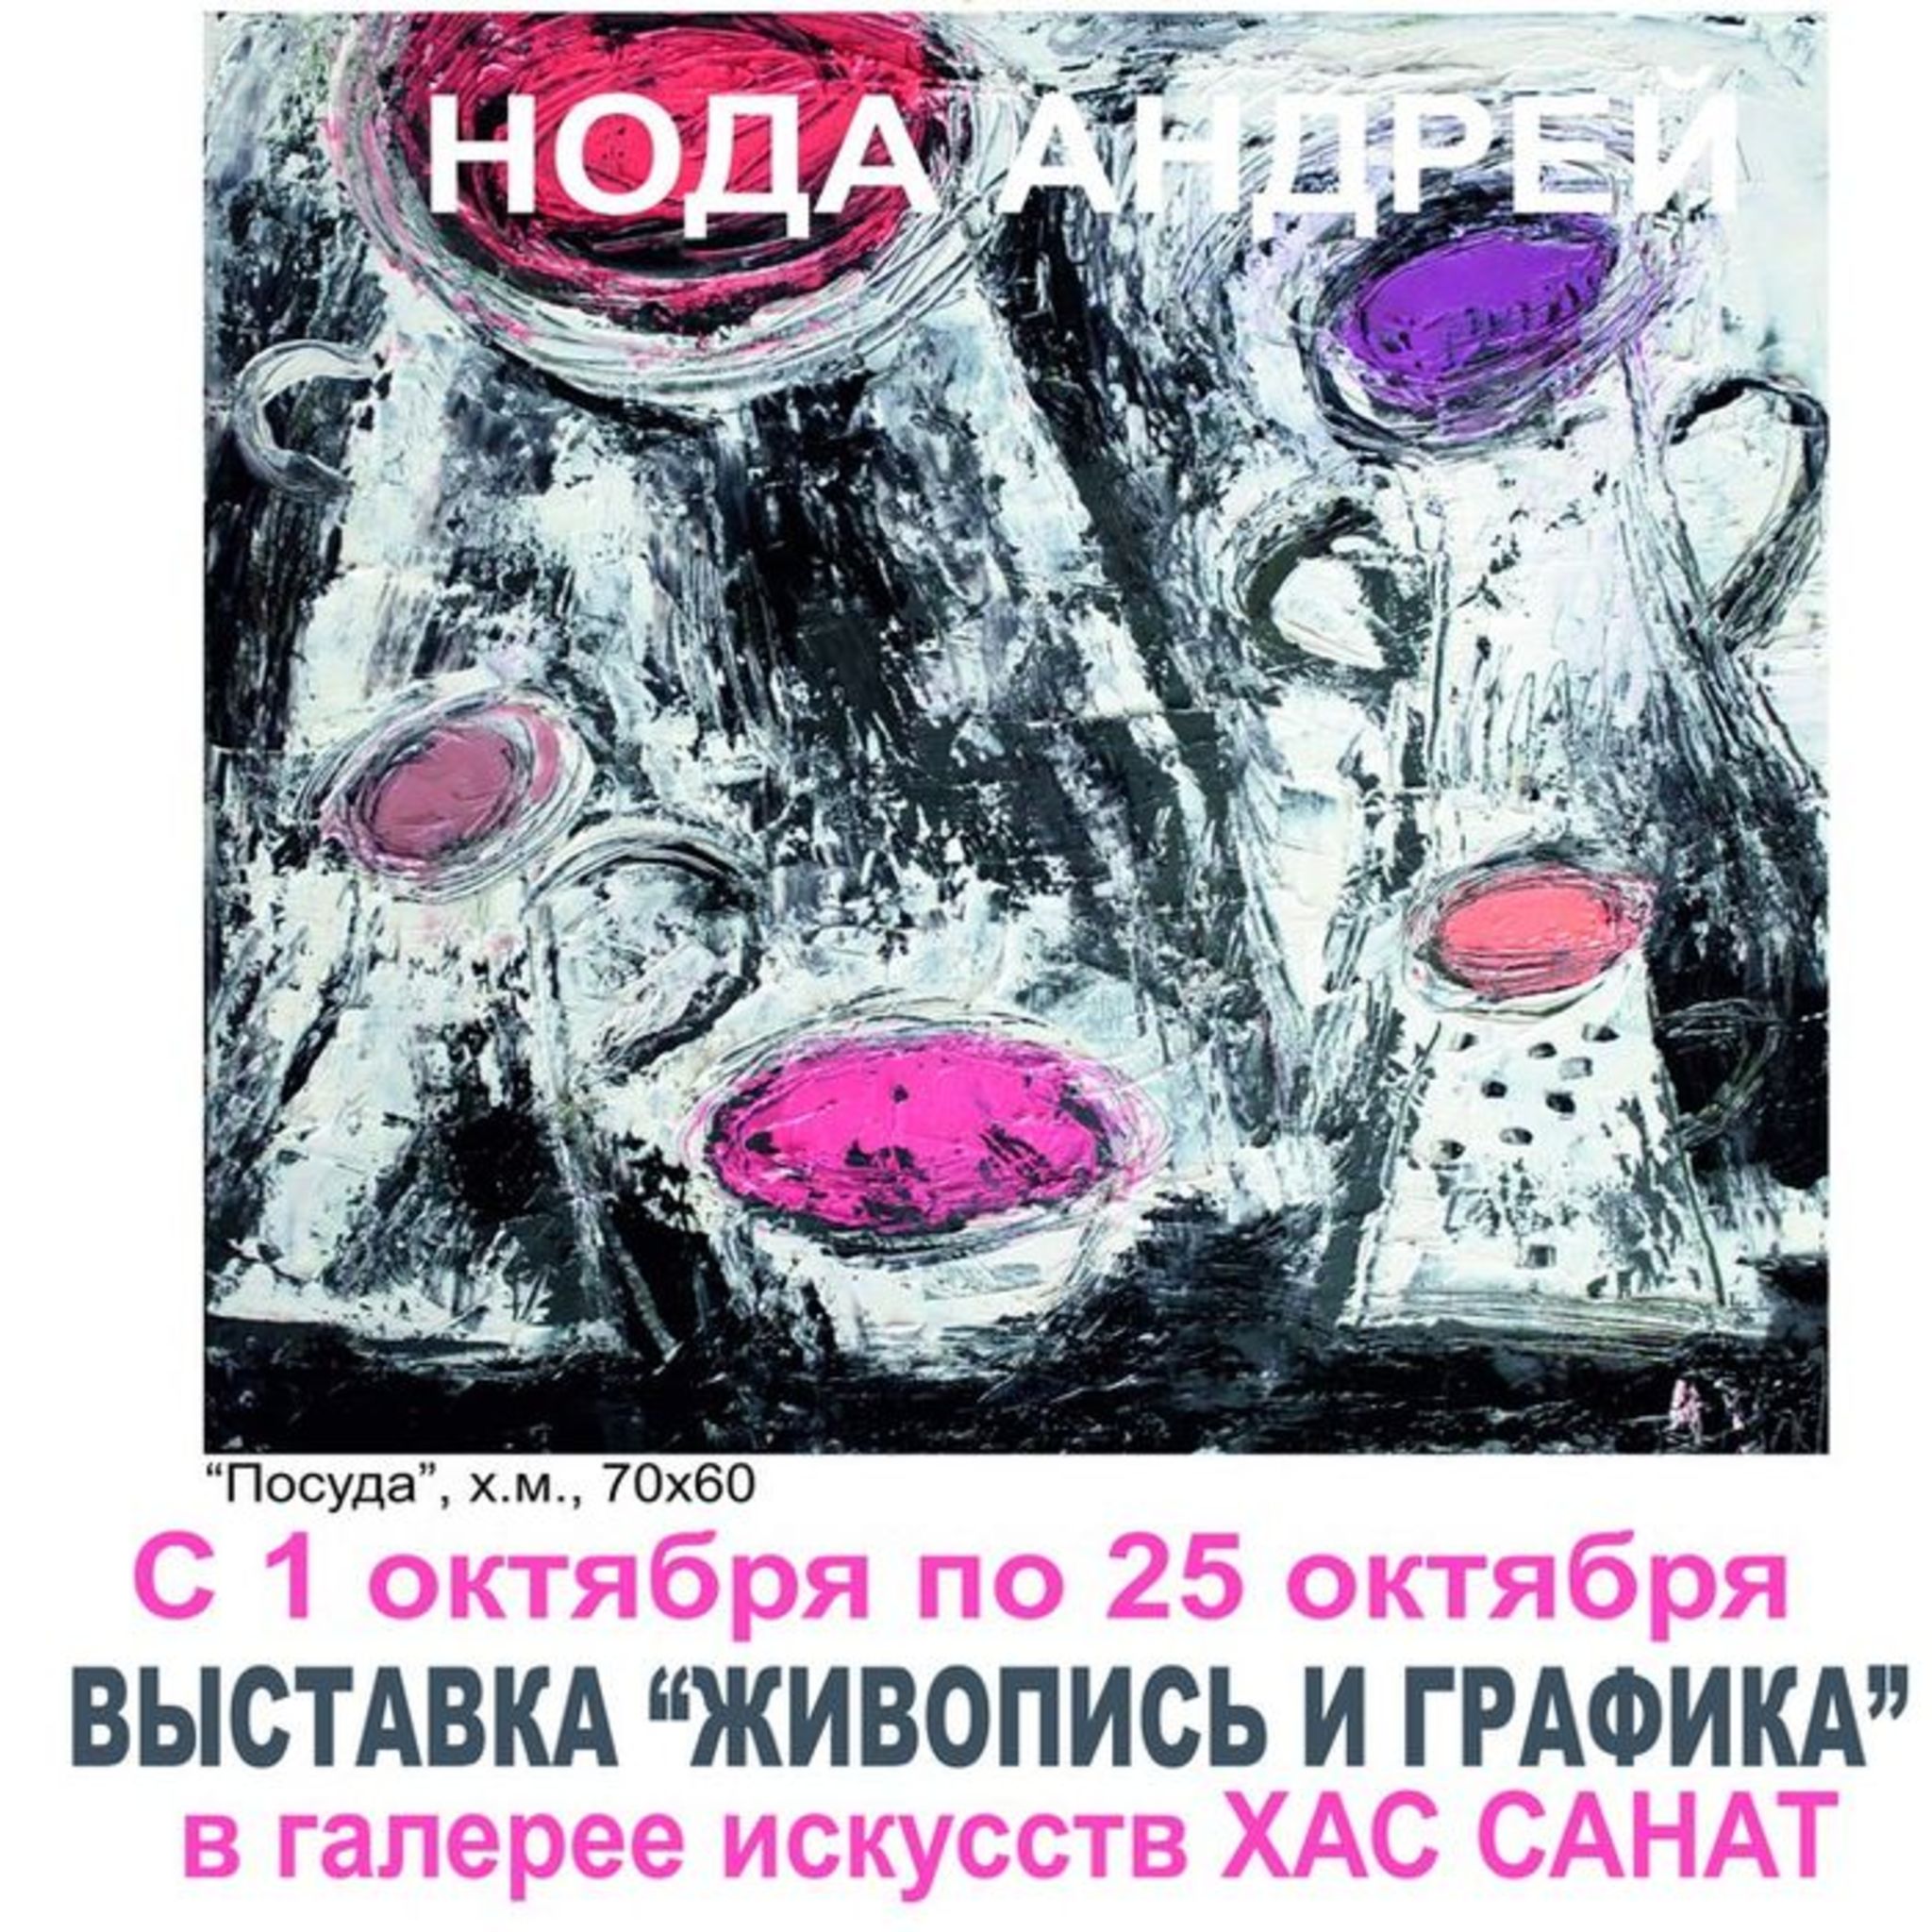 Exposition of Kazakhstani painter Andrei node Paintings and Drawings